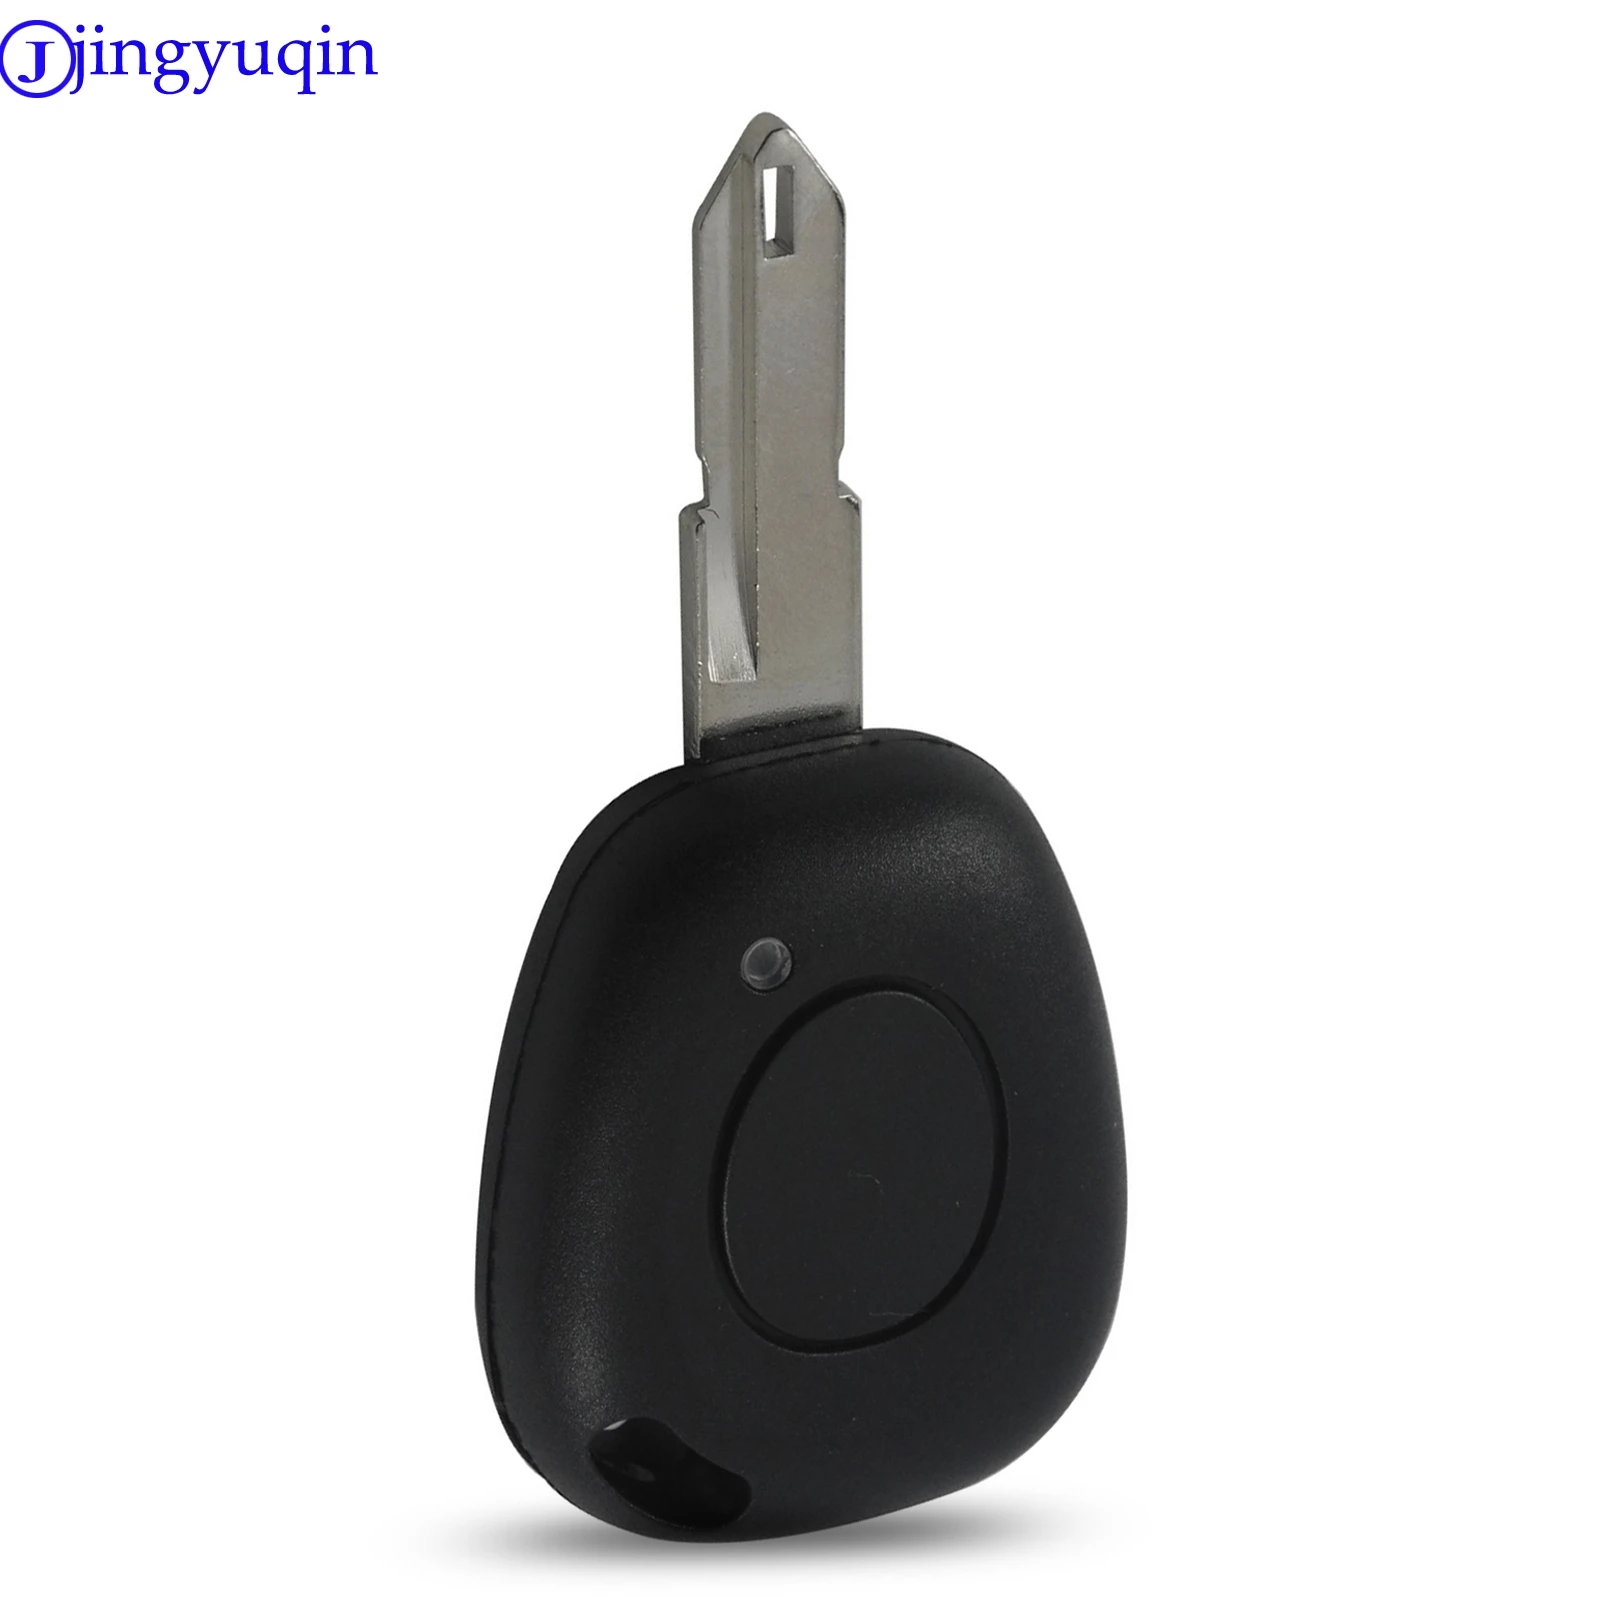 

jingyuqin Replacement Car Cover Shell For Renault Twingo Megane Scenic Laguna 1 Button Remote Key Fob Case With Uncut Blade NE73